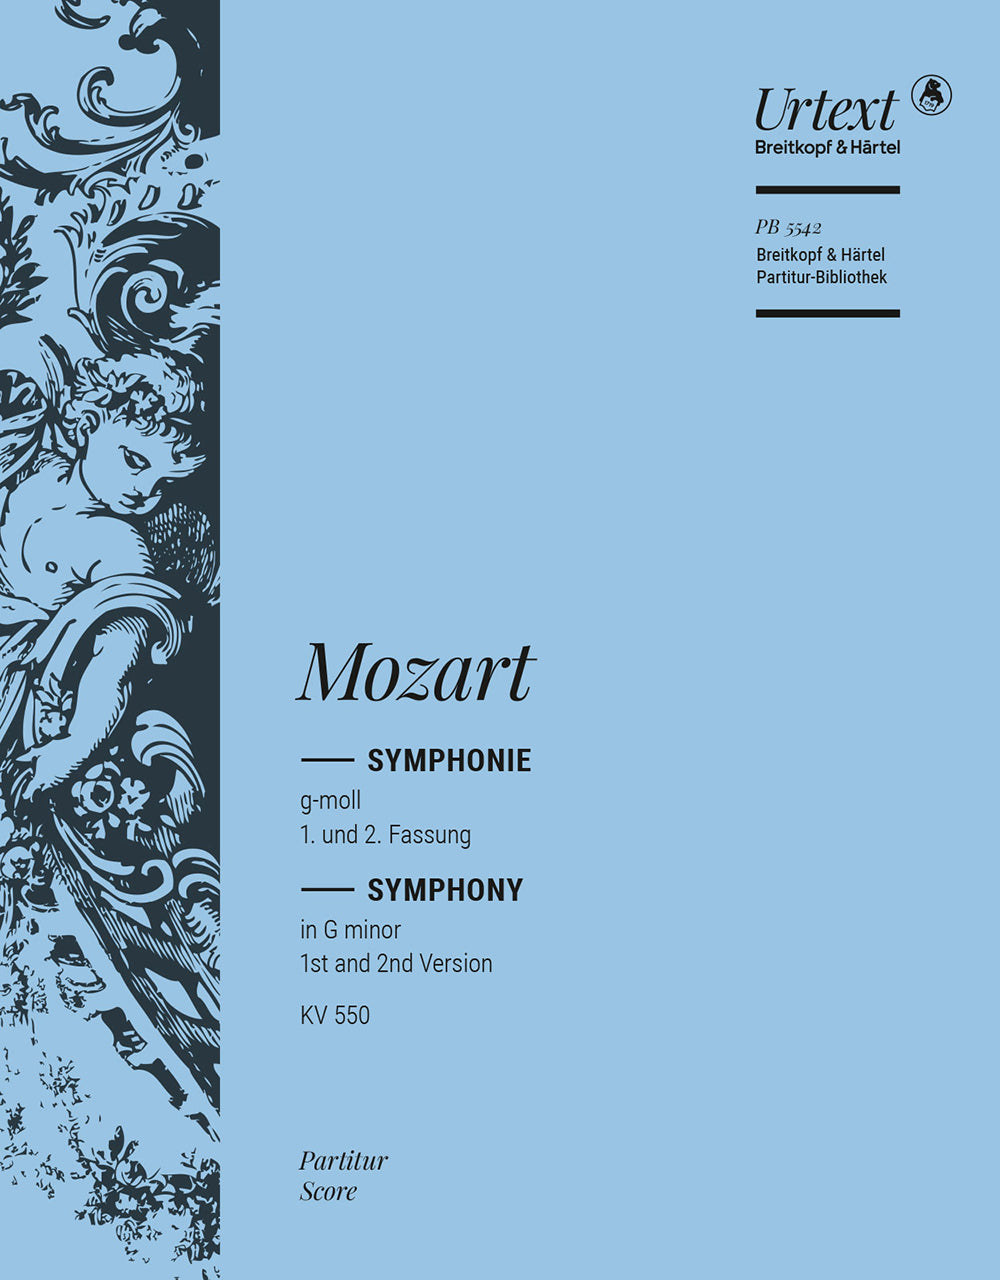 Mozart Symphony No. 40 in G minor K. 550 1st and 2nd Version Full Score